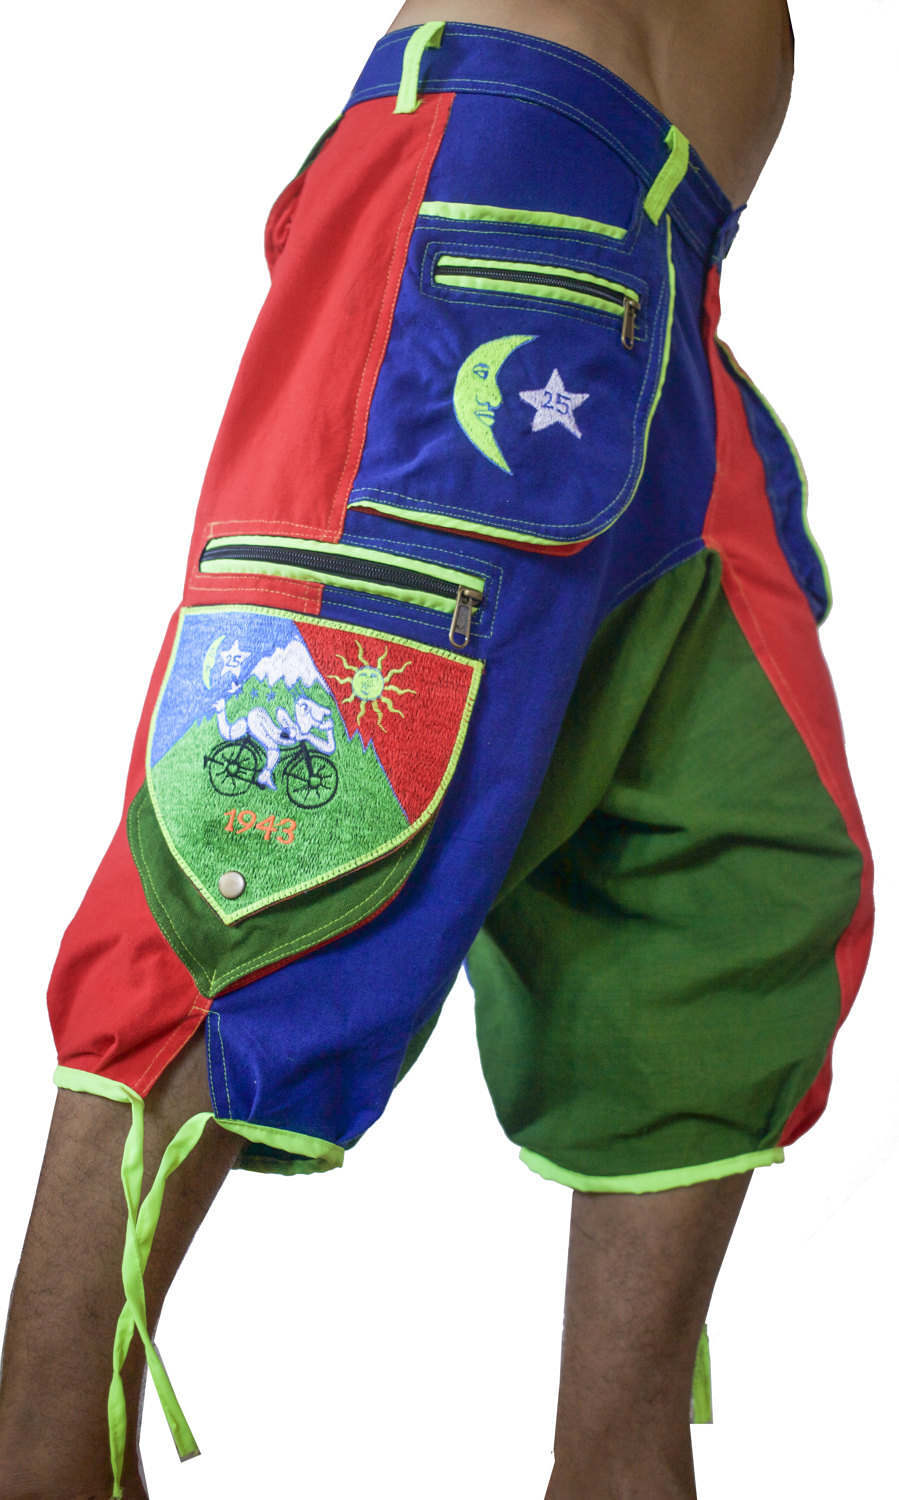 Bicycle Day LSD Pants - 9 pockets with 4 zip locks - cult Albert Hofmann psychedelic vintage - any size available handmade after order